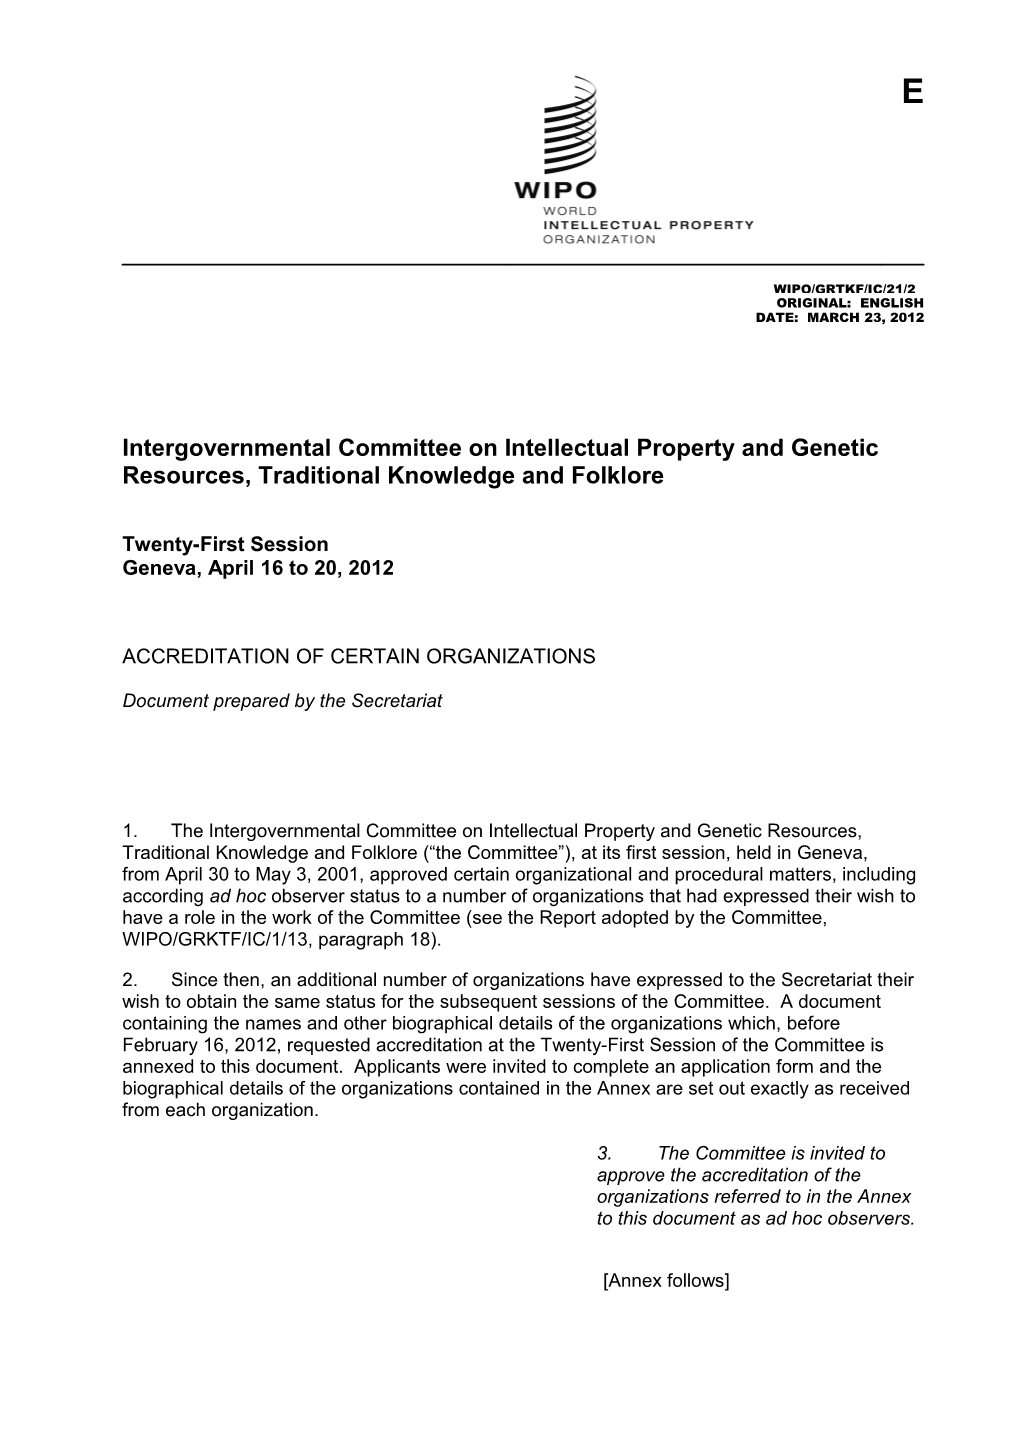 Intergovernmental Committee on Intellectual Property and Genetic Resources, Traditional s4